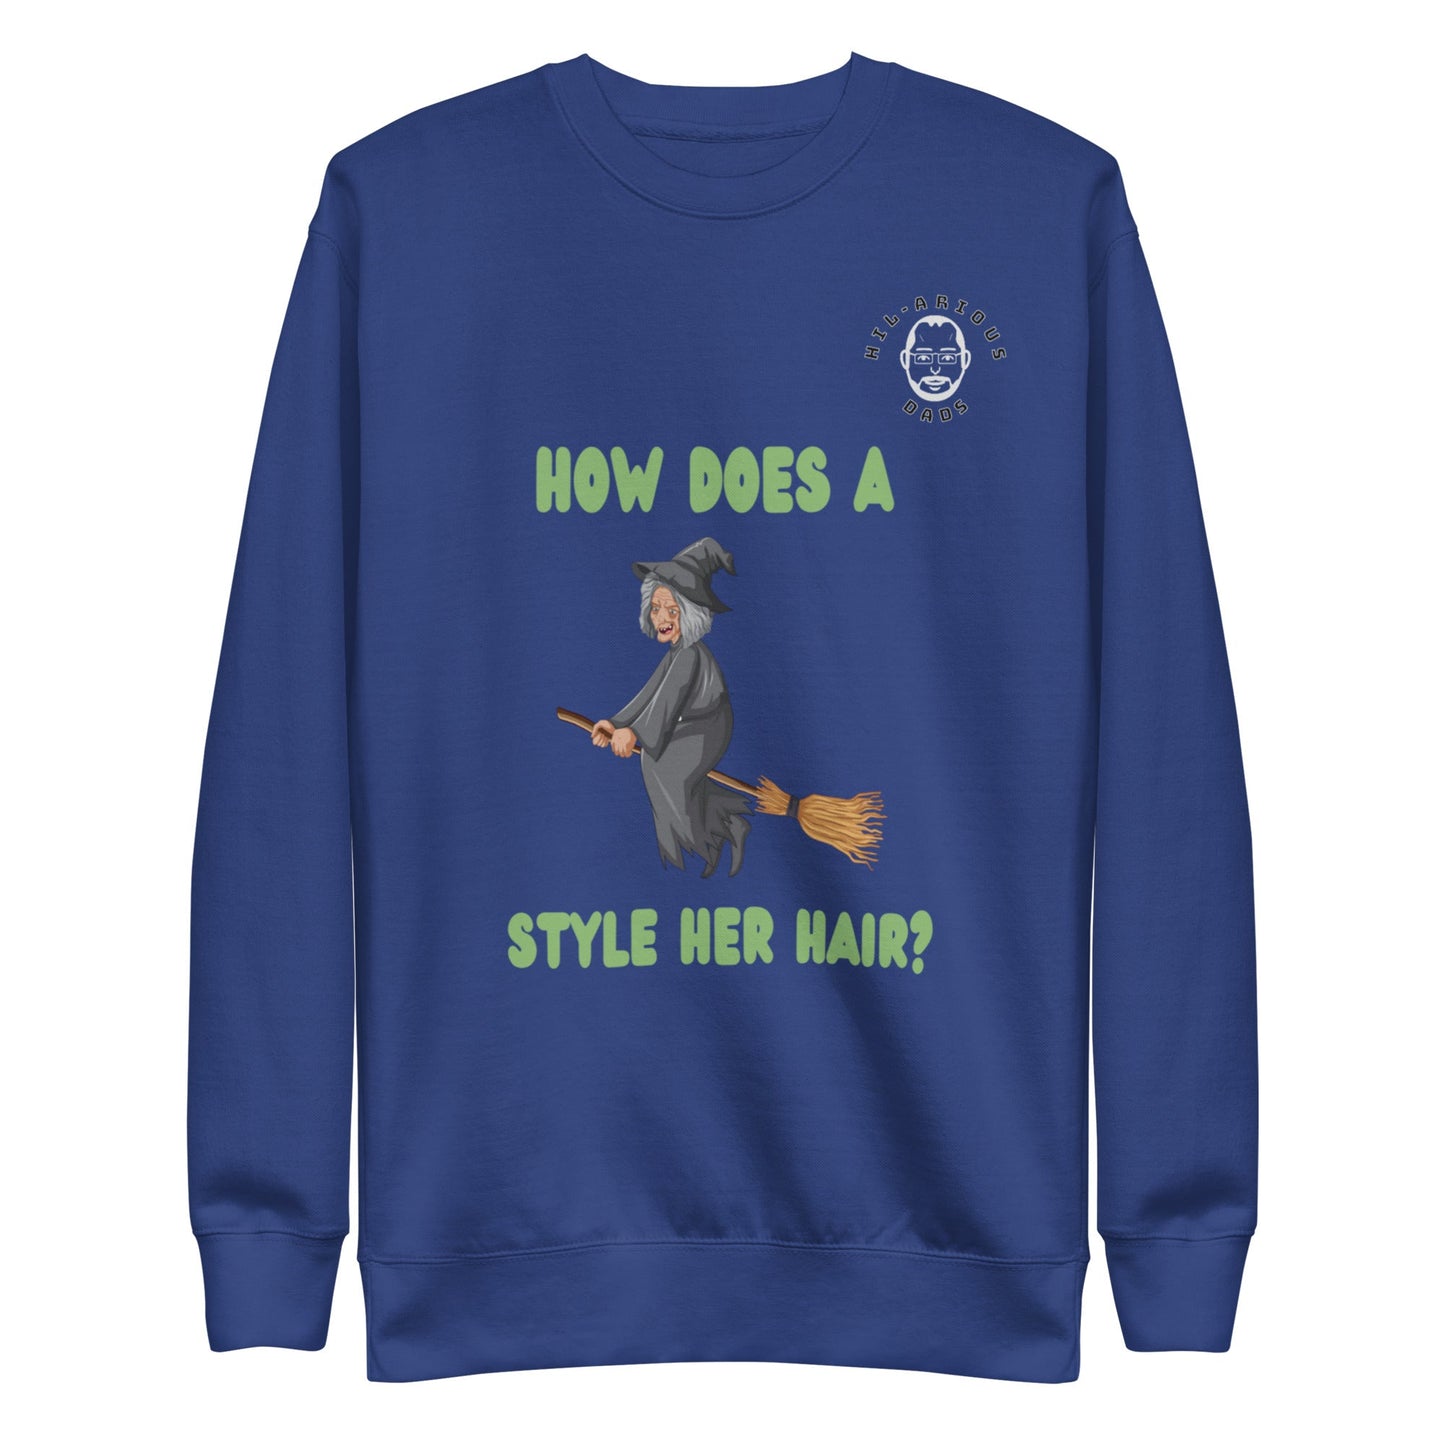 How does a witch style her hair?-Sweatshirt - Hil-arious Dads